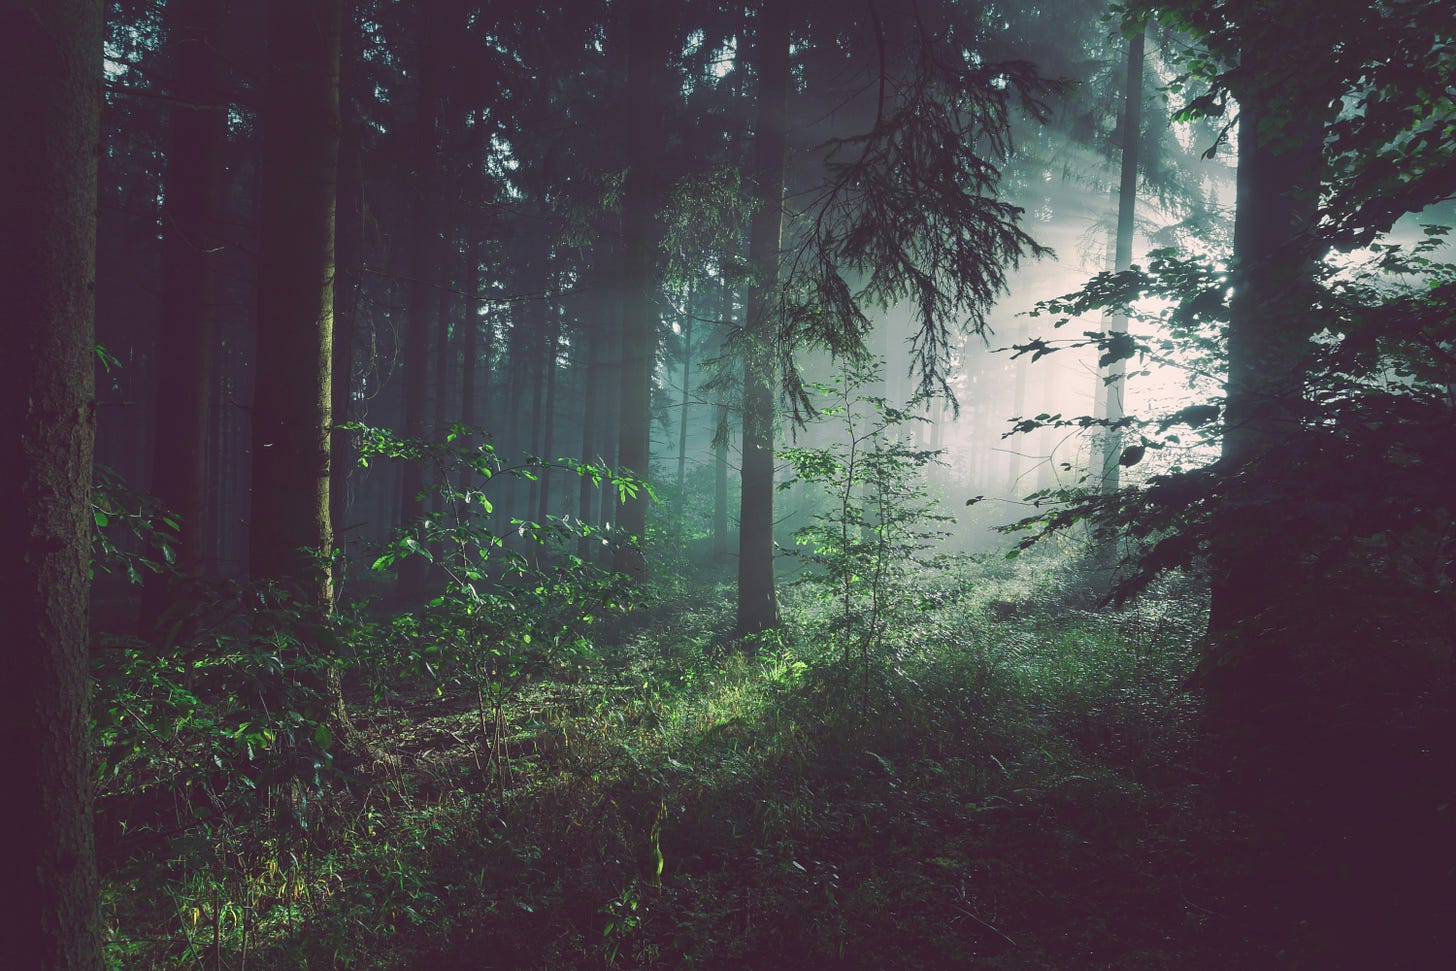 Emerging out of a dense forest into the light. [Credit: Sebastian Unrau on Unsplash]